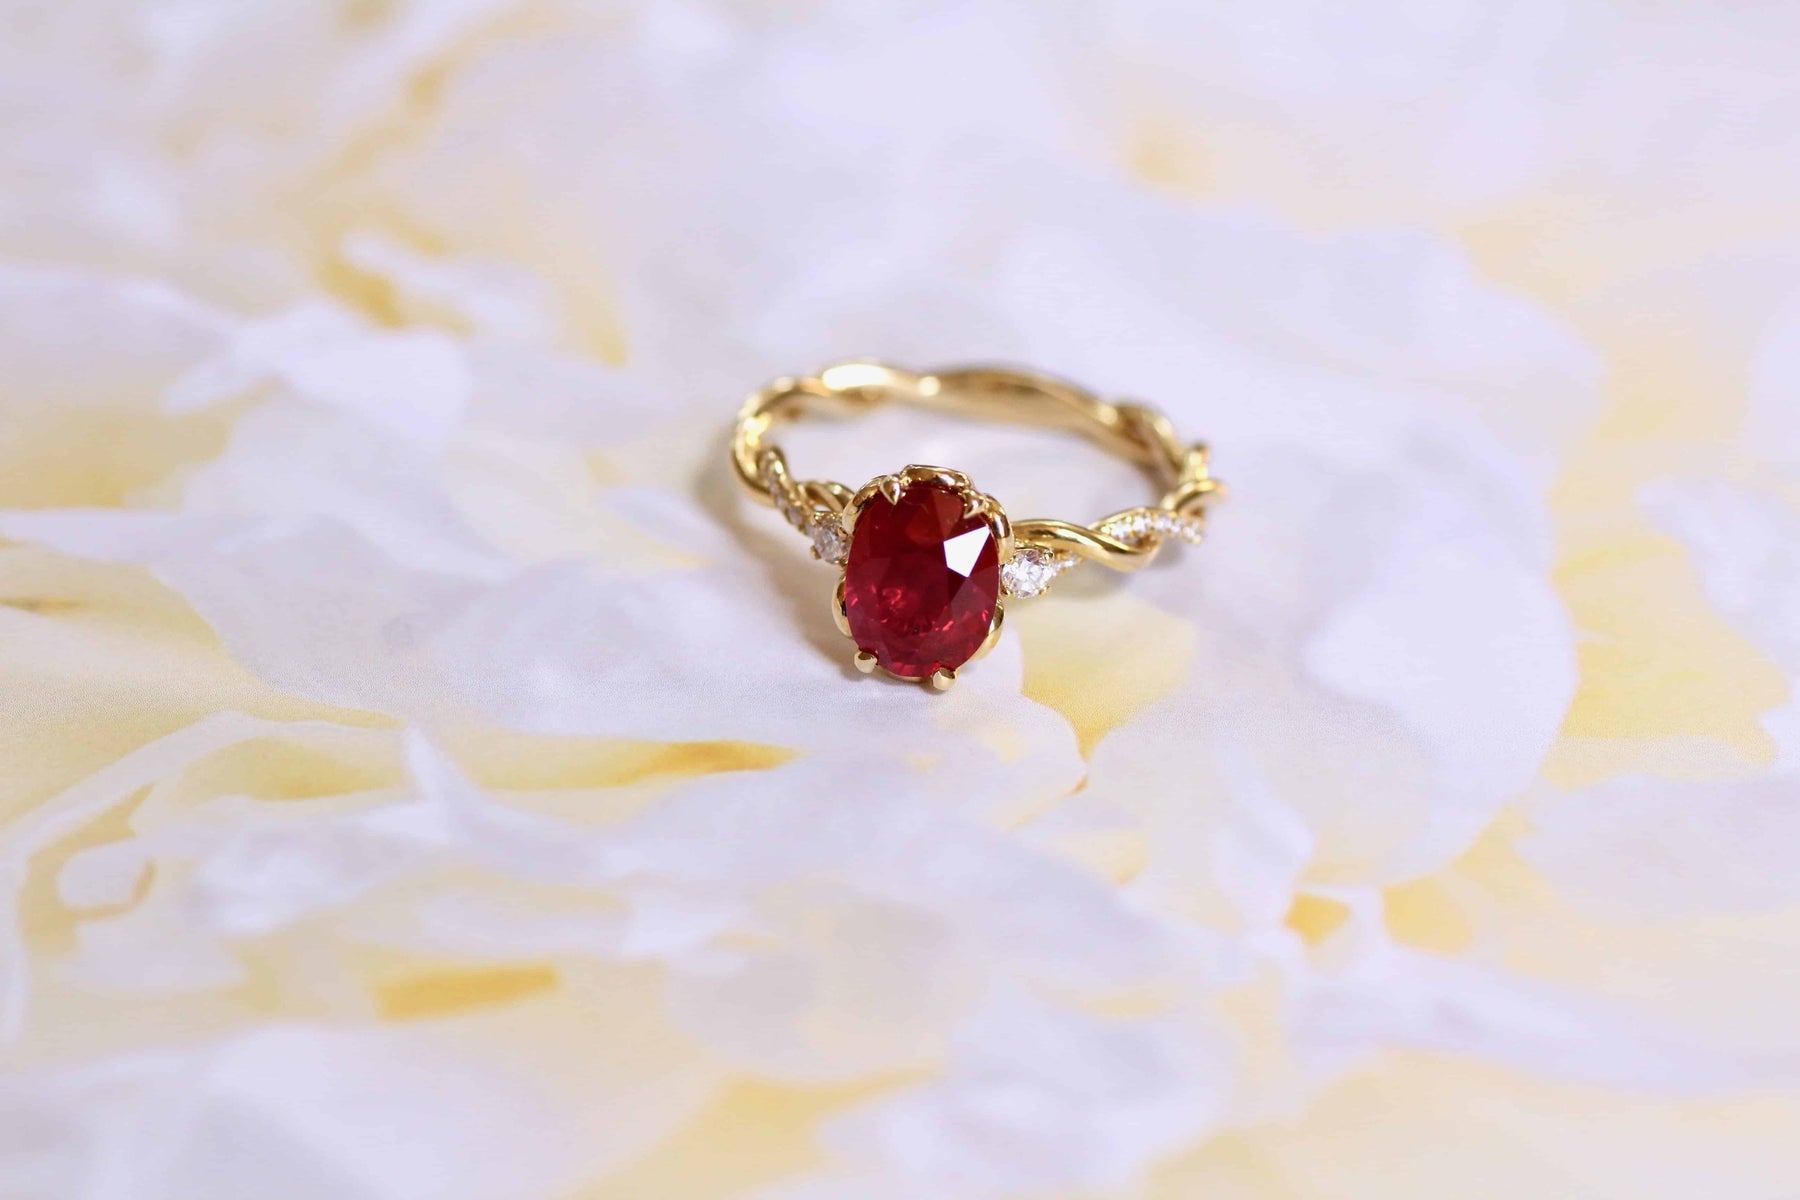 Vintage Inspired Ruby Rings | With Clarity